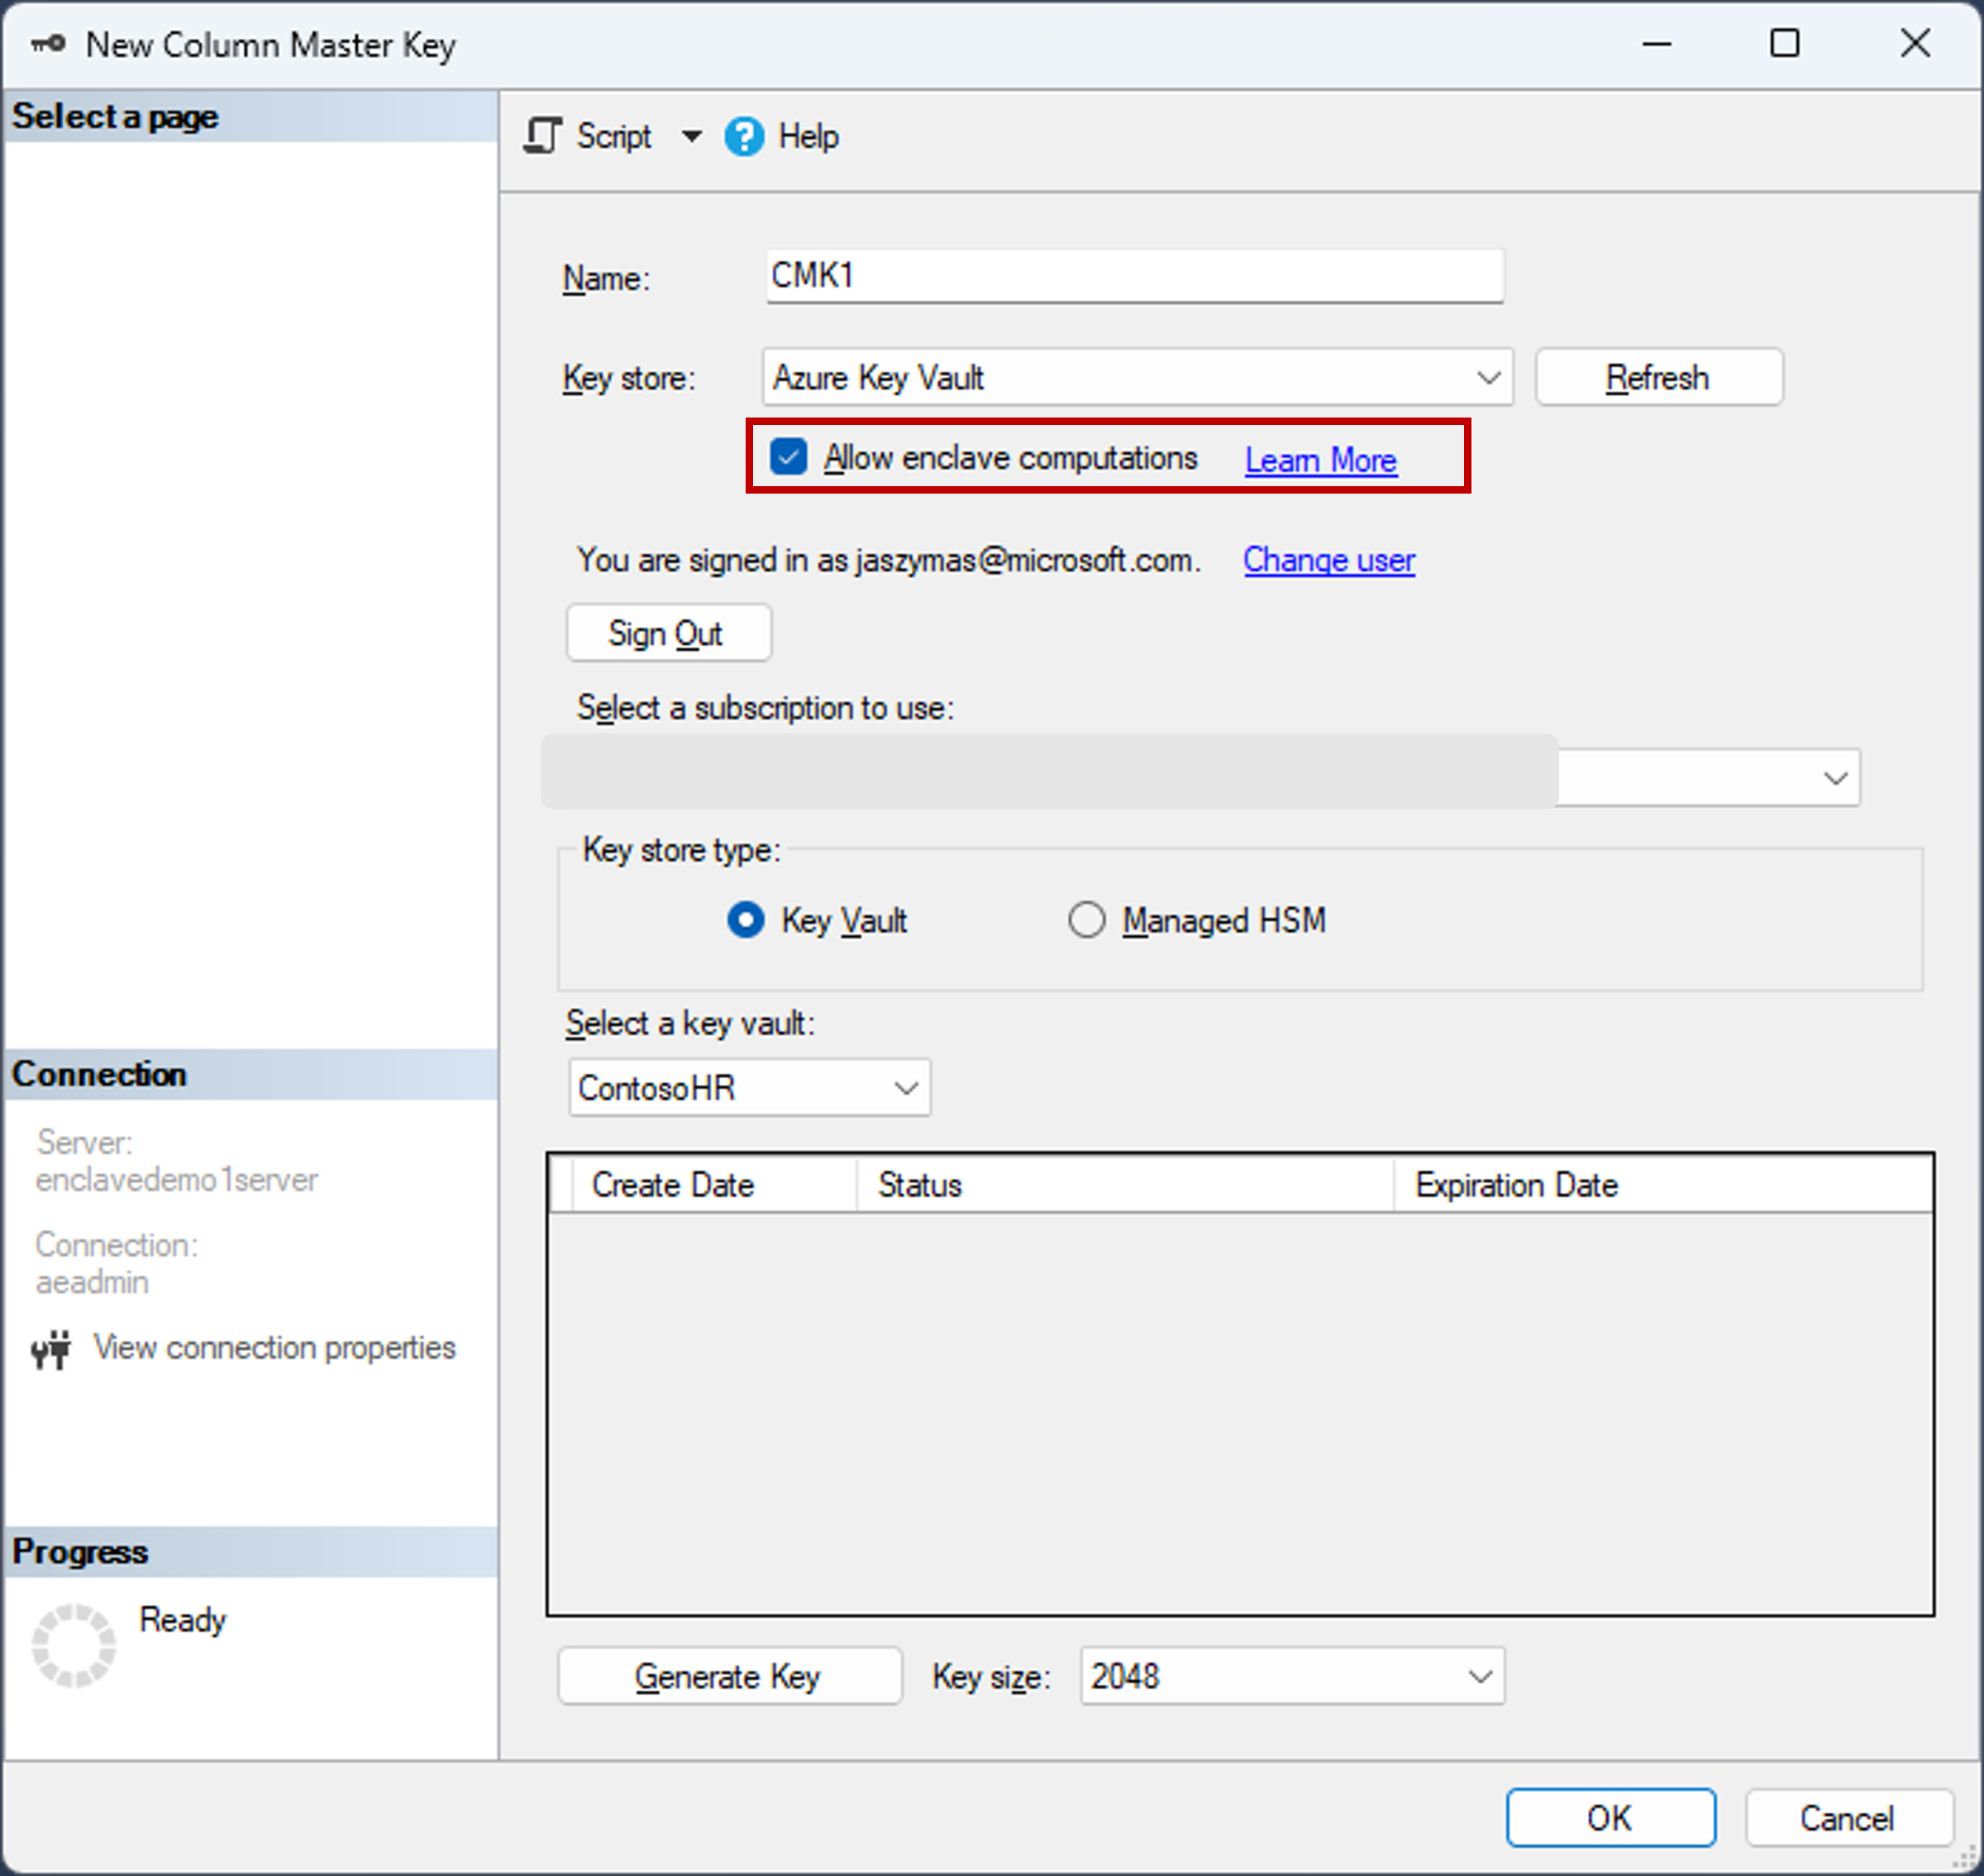 Screenshot of the allow enclave computations selection in SSMS when creating a new column master key.